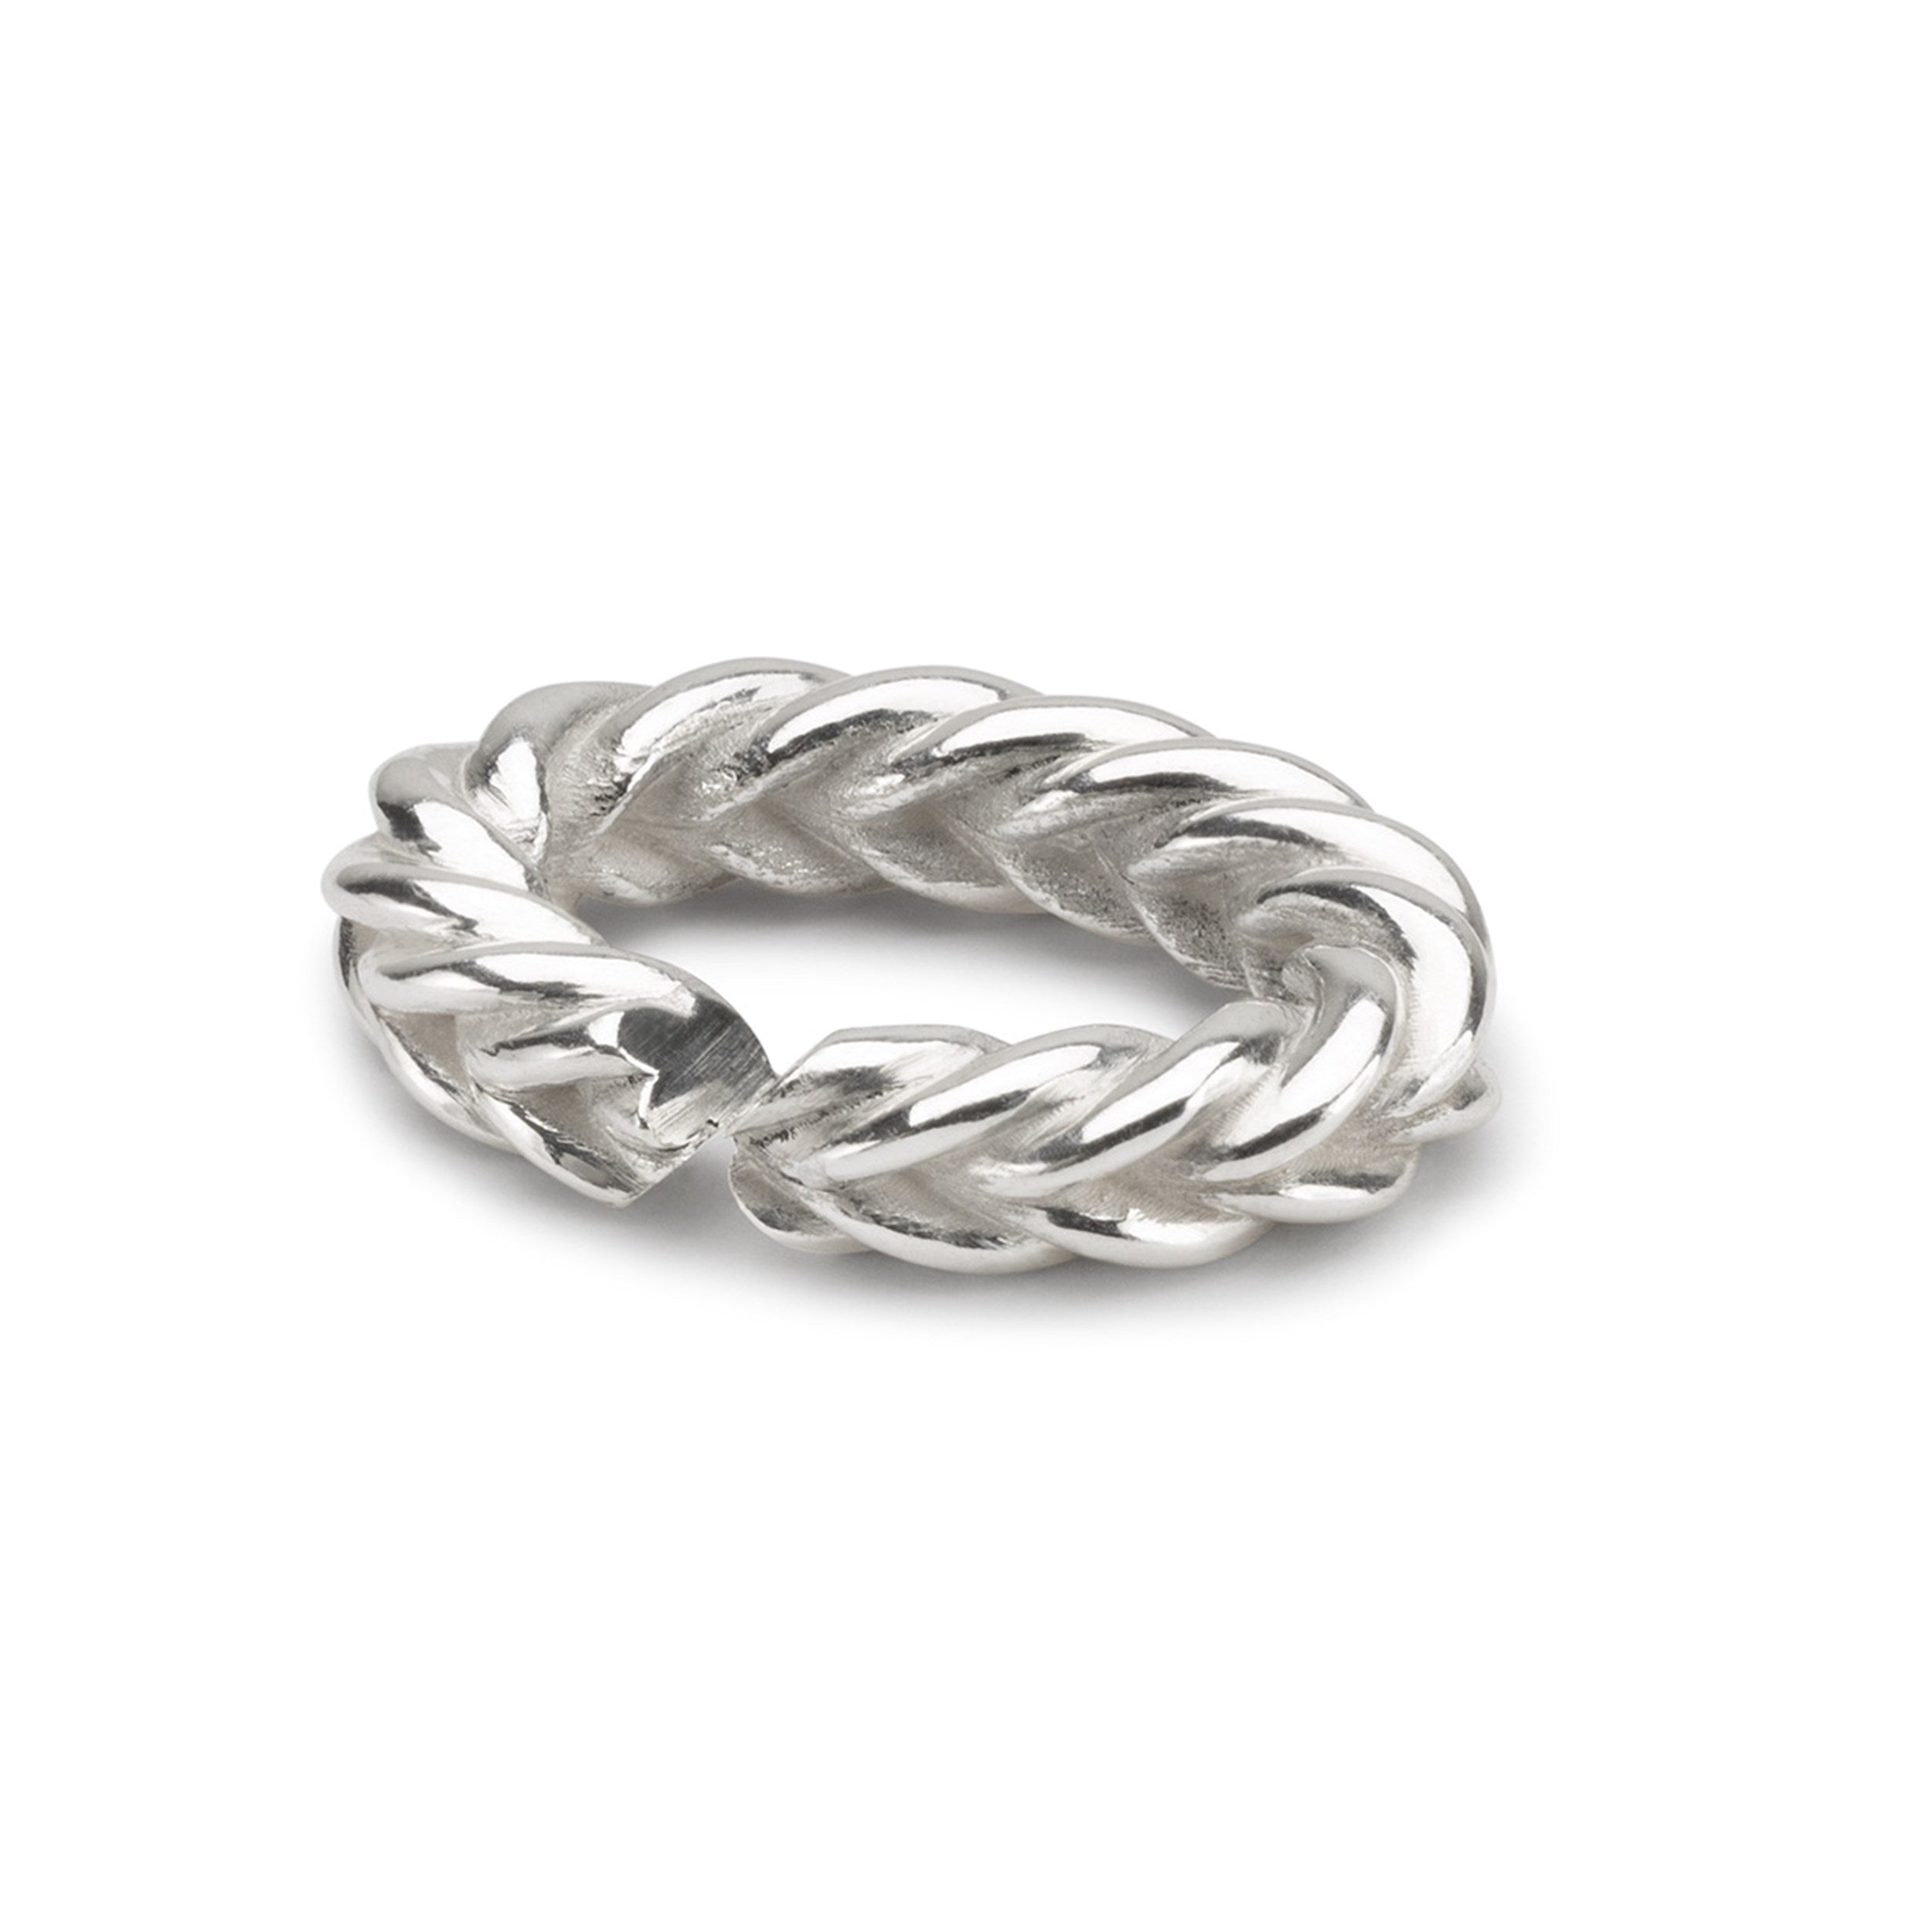 Foxtail chain, Single Silver Link